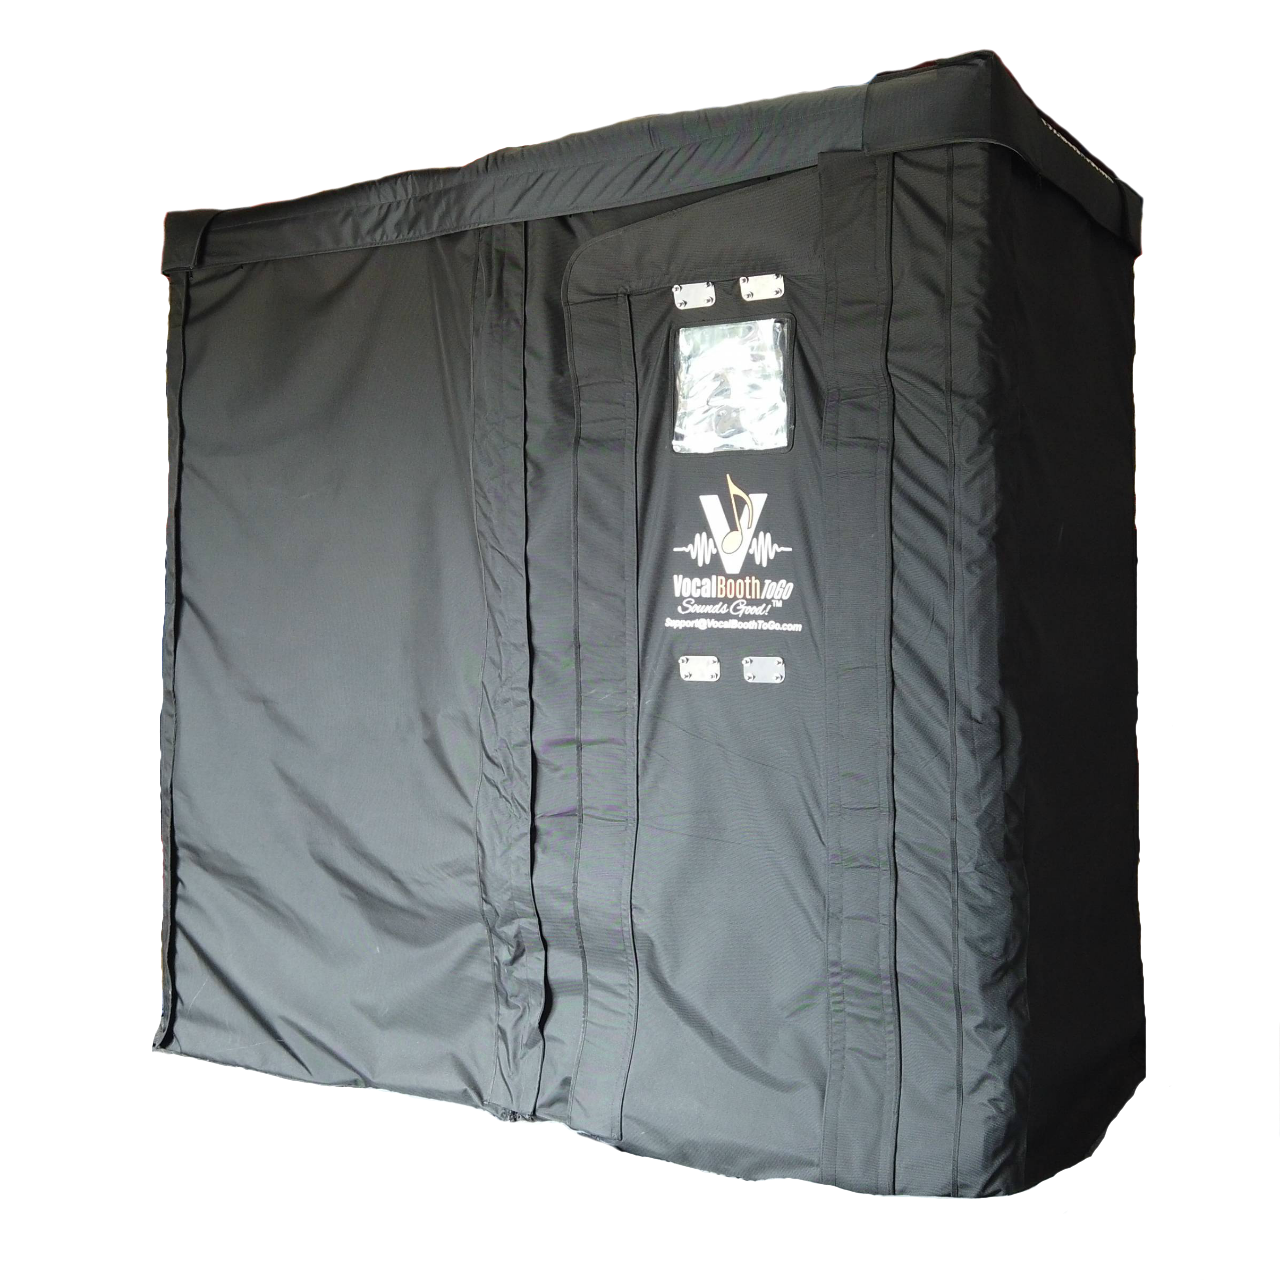 Mobile sound isolation booth 6 x 3 with door with soundproofing